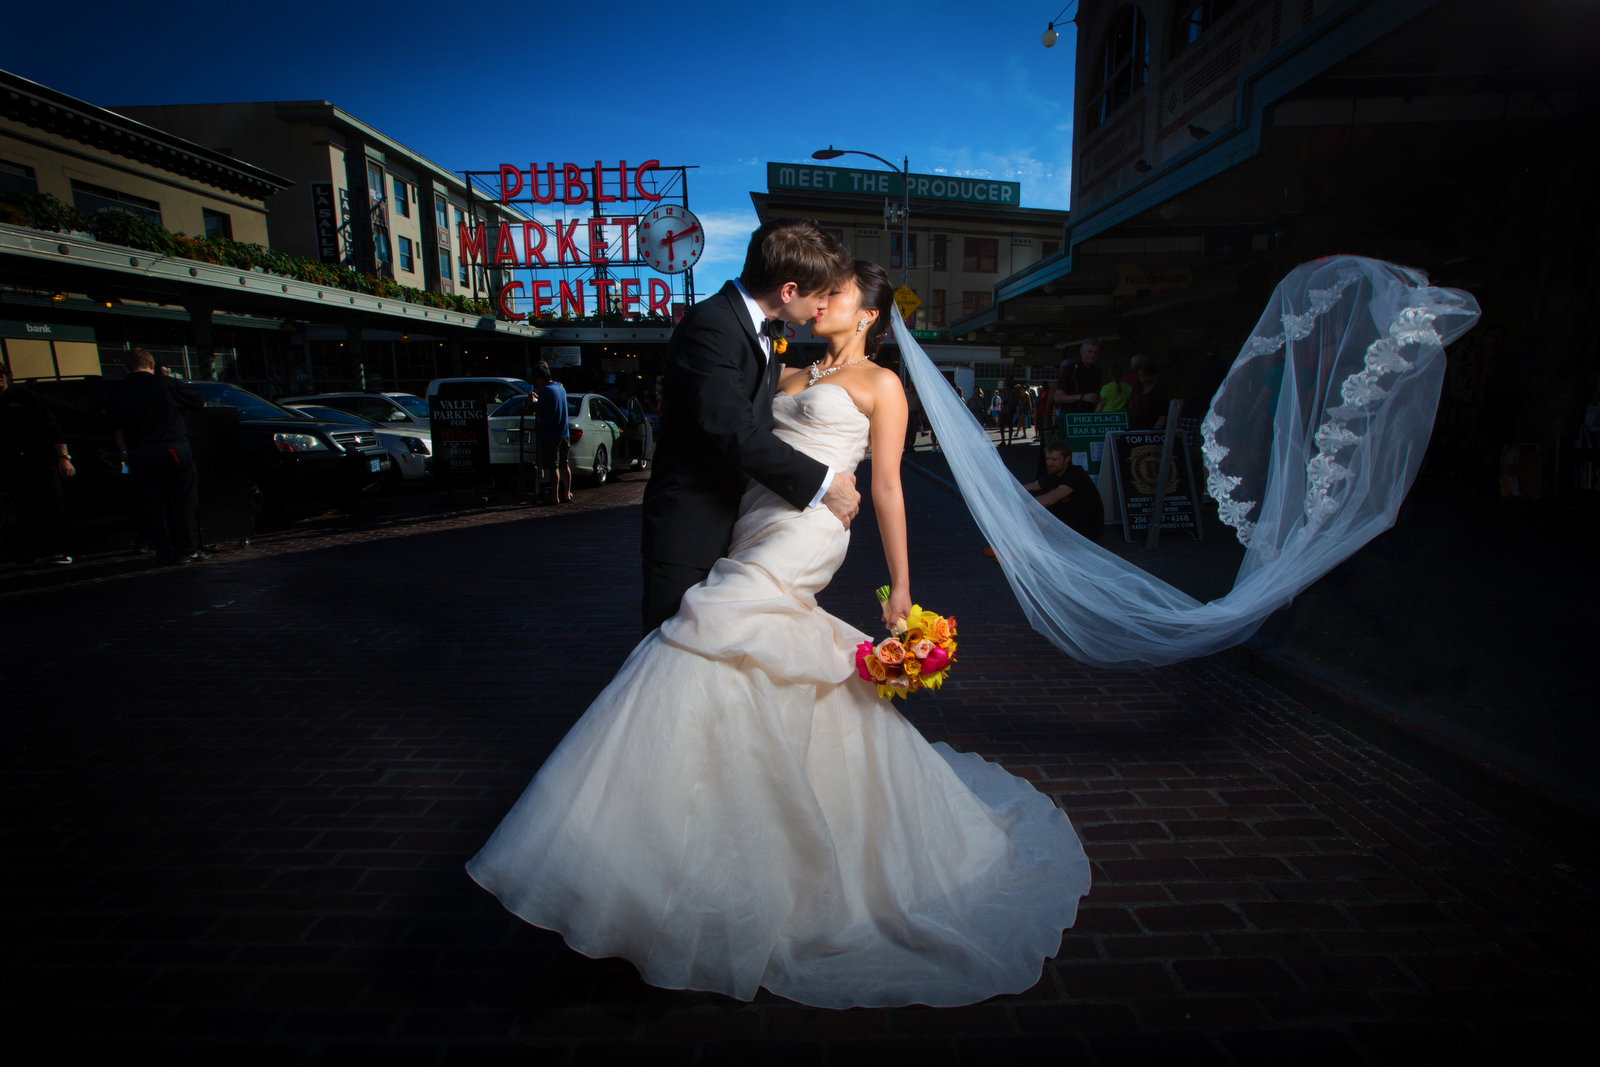 A gust of wind catches the veil as the bride & groom kiss at the Pike Place Market prior to their wedding at the Seattle Aquarium. (Wedding Photography by Scott Eklund/Red Box Pictures)